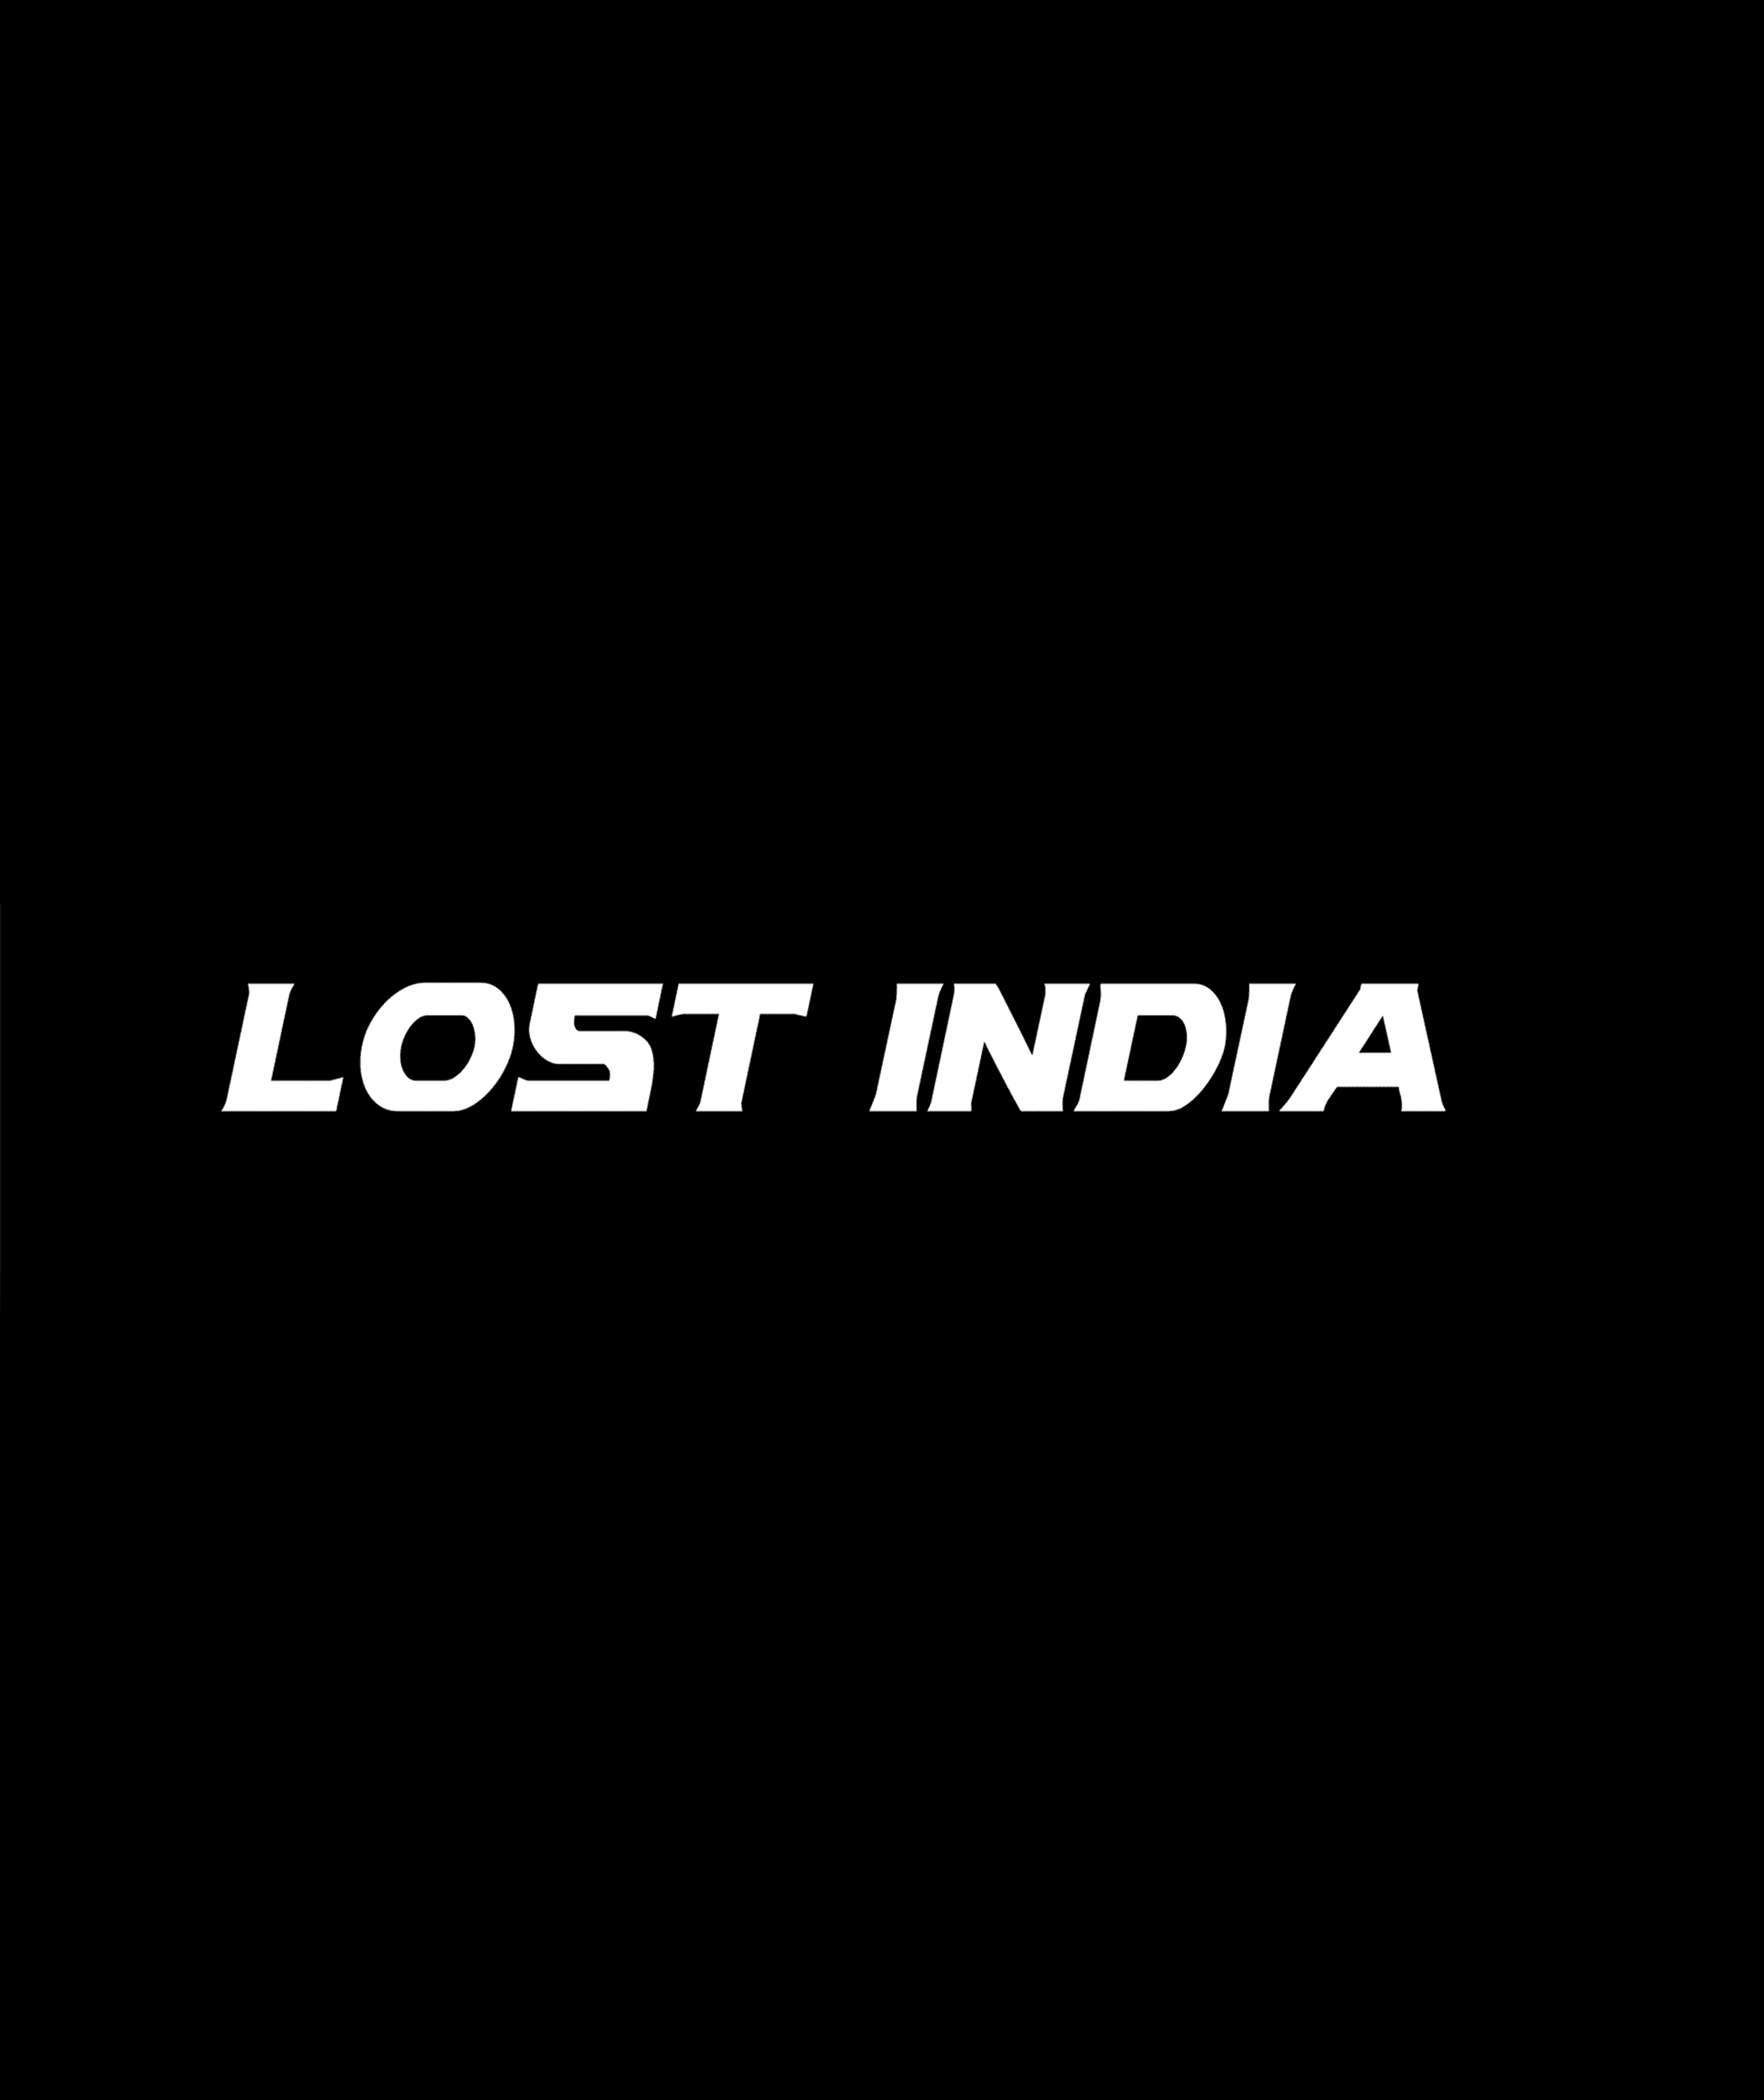 Lost India Teaser #583/1111